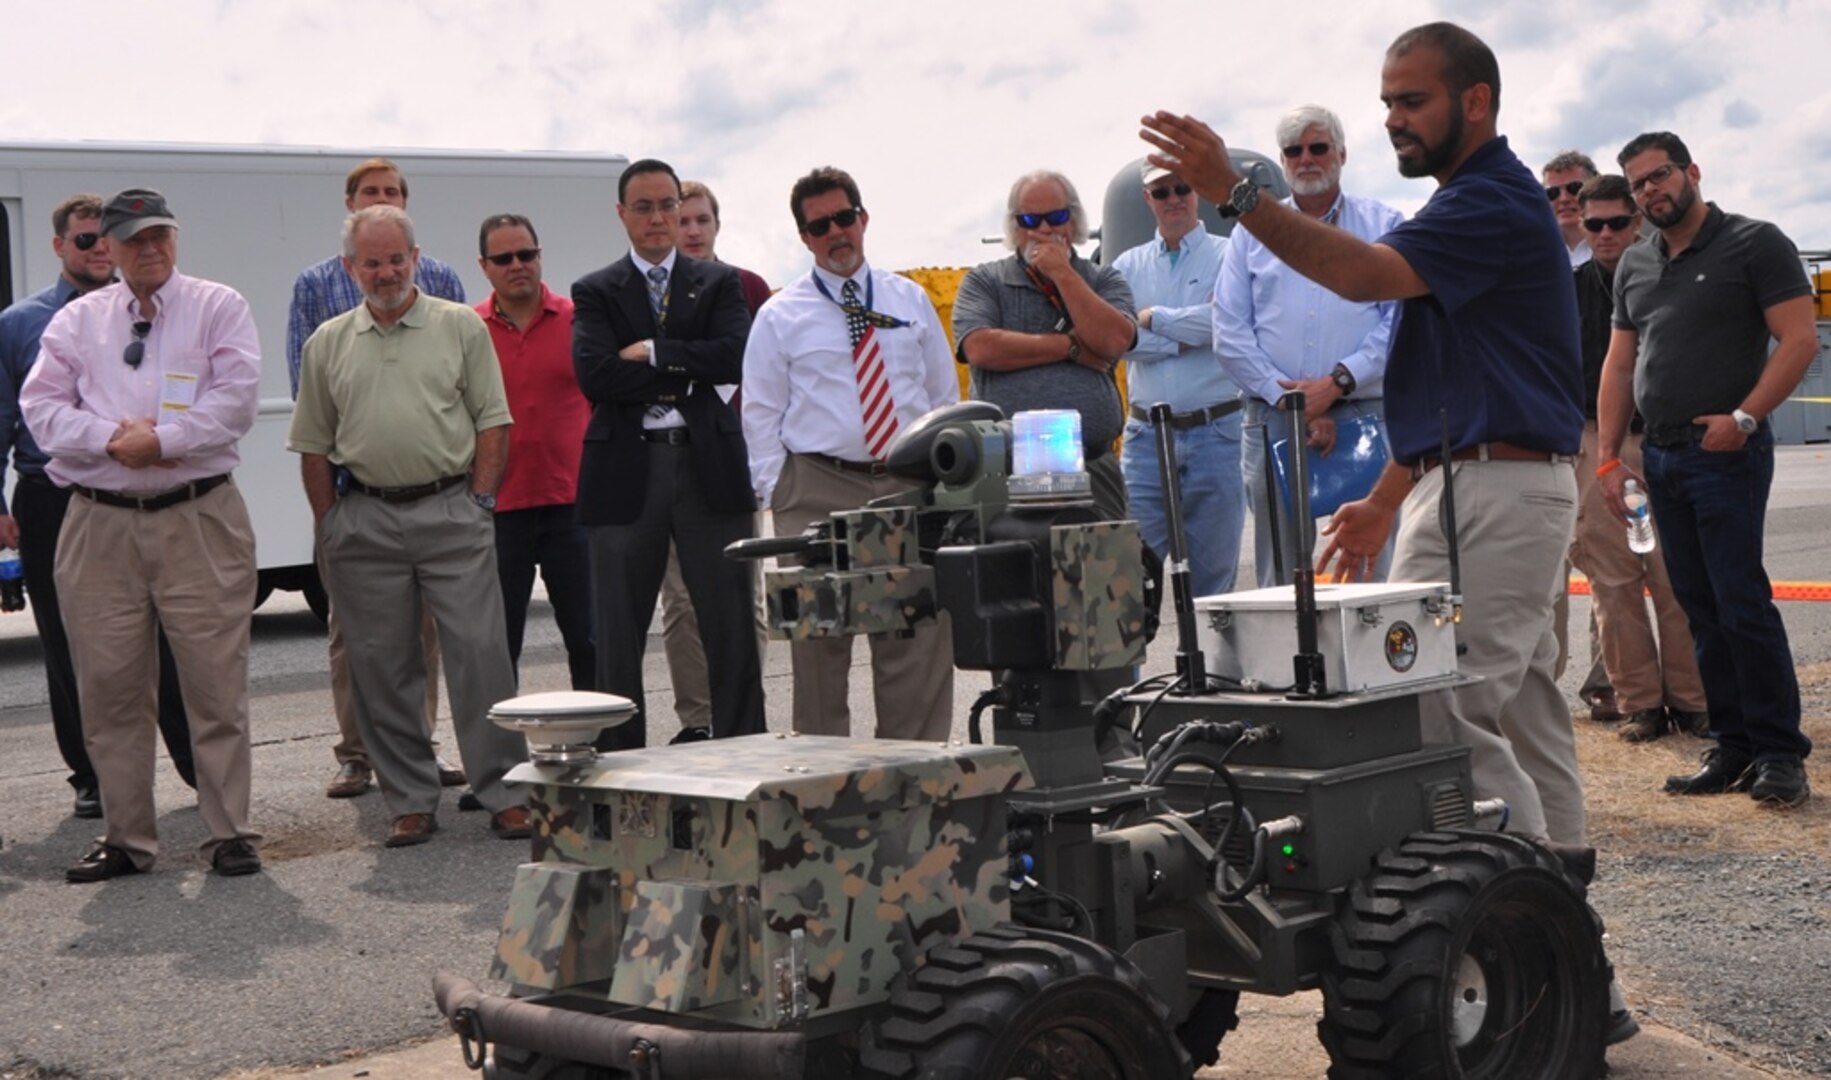 IMAGE:DAHLGREN, Va. (Sept. 12, 2017) - Navy scientist Jamshaid 'JD' Chaudhry briefs visitors on the Weaponized Autonomous System Prototype (WASP) after the Sly Fox Mission 22 demonstration held at Naval Surface Warfare Center Dahlgren Division. The demonstration featured the capabilities of the Collaborative Aerial Network for the Autonomous Remote Engagement System (CANARES) rapid prototyping technology developed by Mission 22 junior scientists and engineers. CANARES consists of an unmanned aerial vehicle, unmanned ground vehicle, and a command and control station.